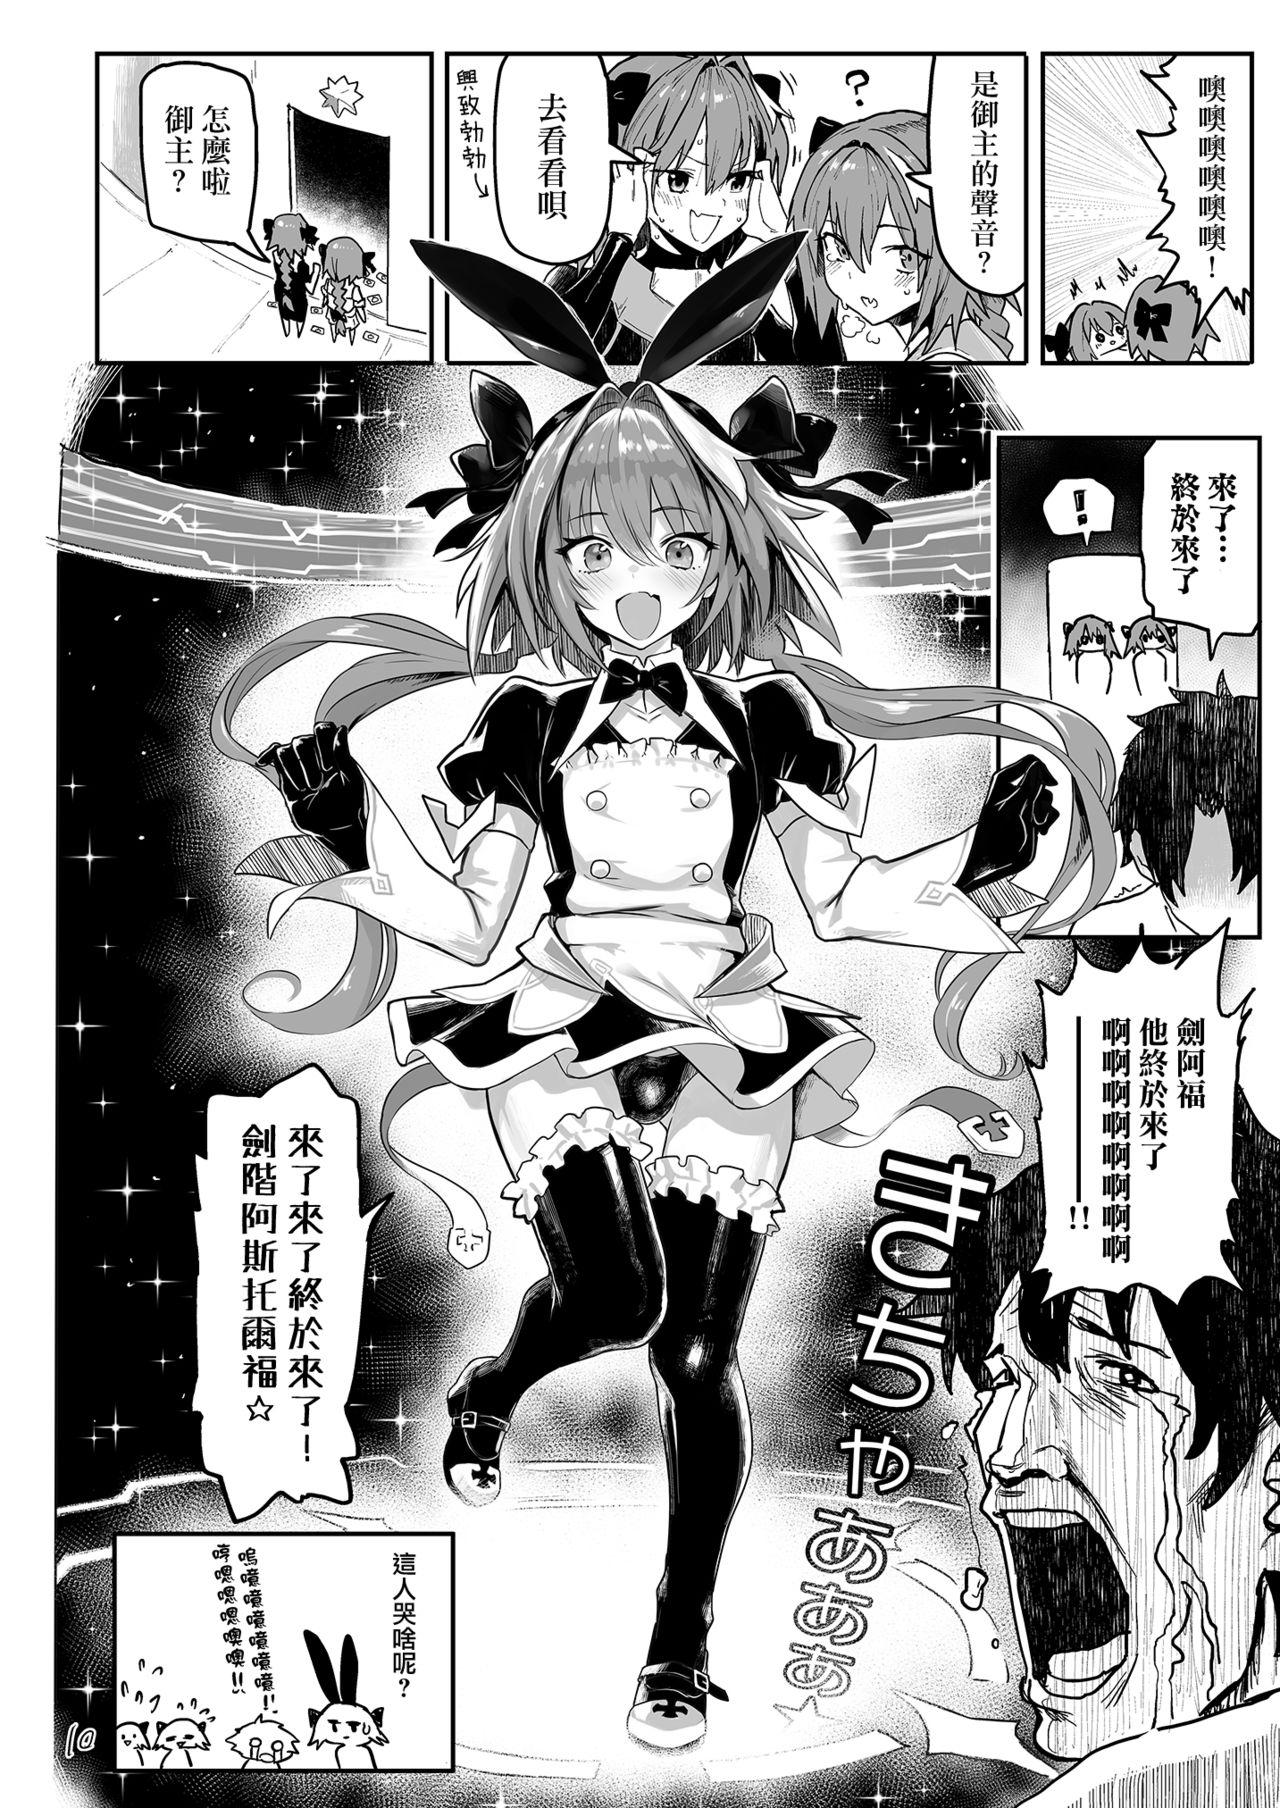 Vagina AAA - Fate grand order Teen Porn - Page 11